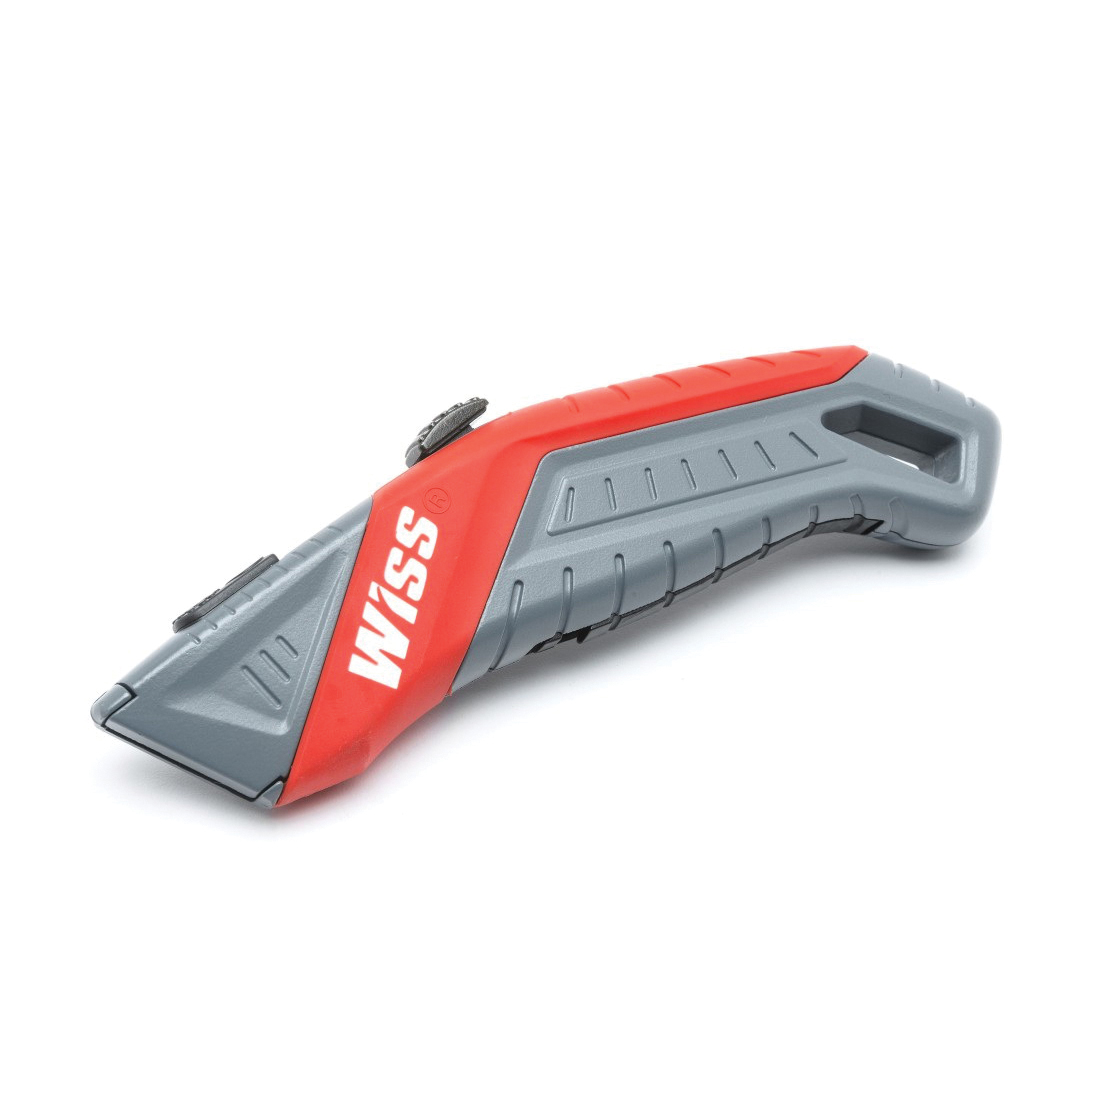 CRESCENT Wiss® WK8V Retractable Utility Knife, 3 Blades Included